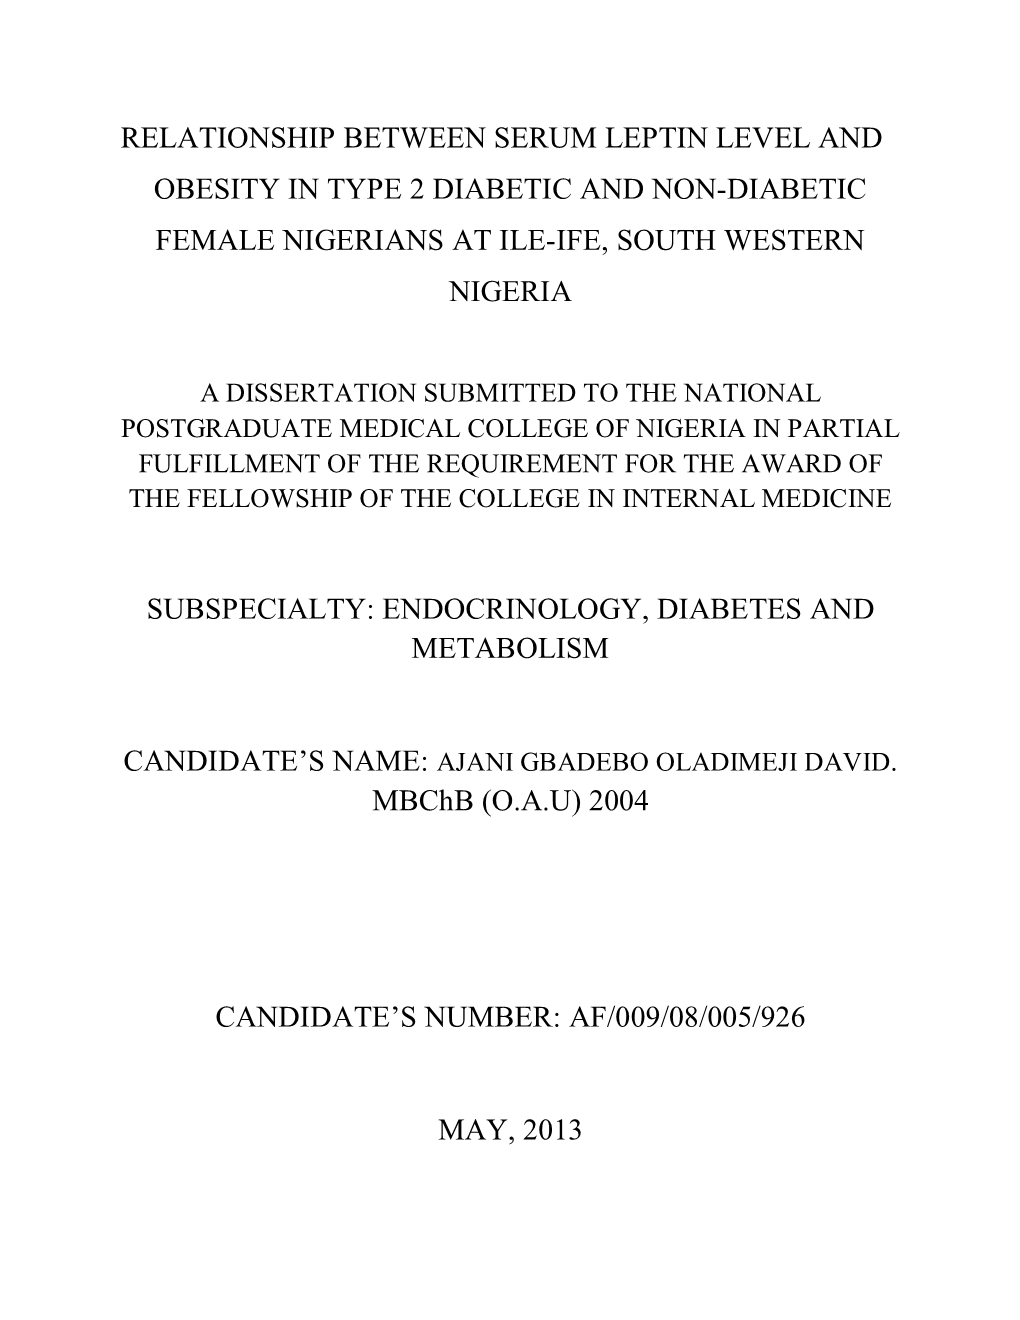 Relationship Between Serum Leptin Level and Obesity in Type 2 Diabetic and Non-Diabetic Female Nigerians at Ile-Ife, South Western Nigeria